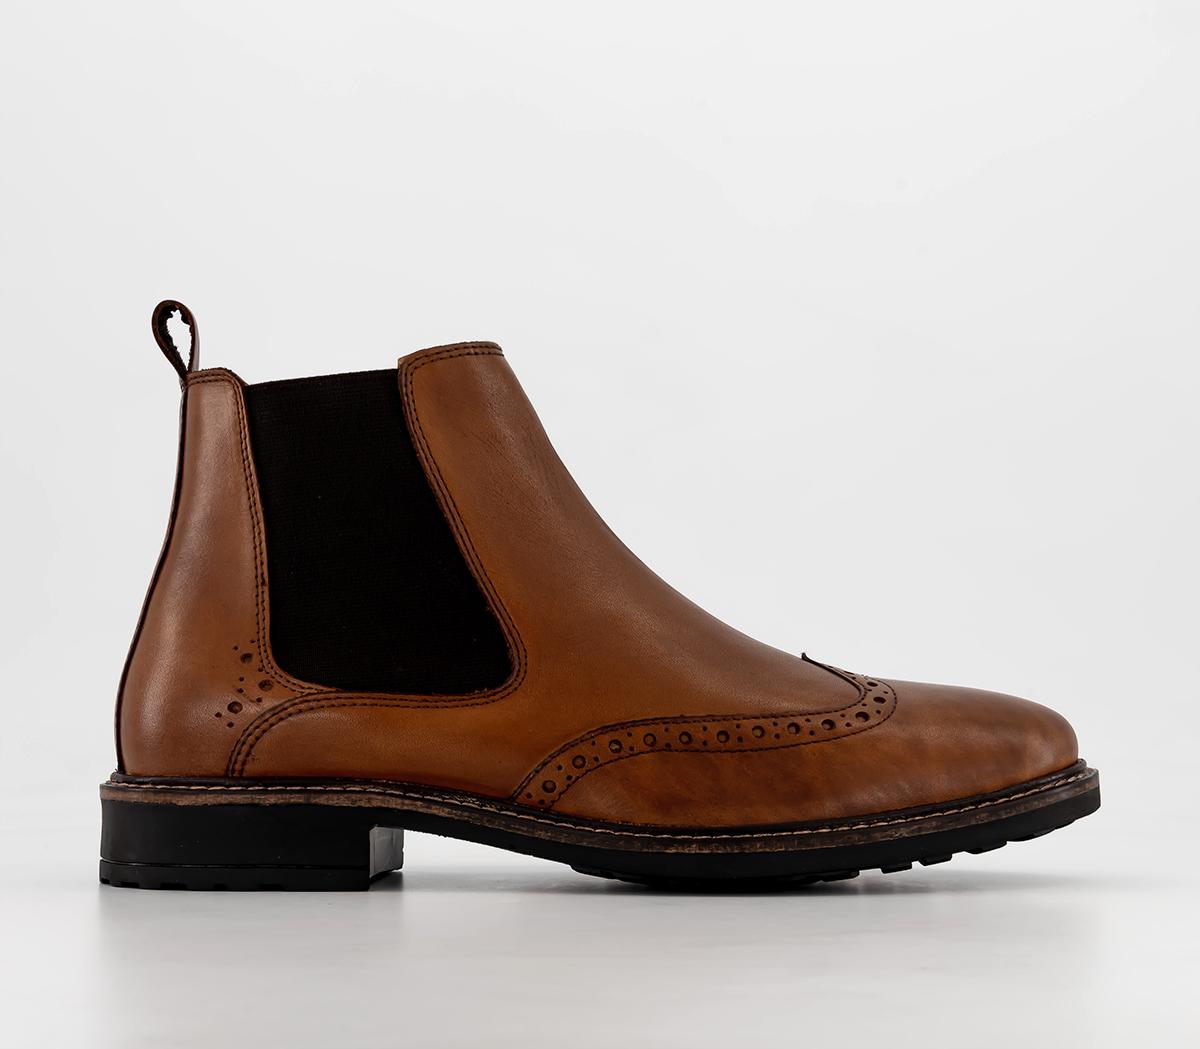 OFFICEBromley Brogue Chelsea BootsTan Leather